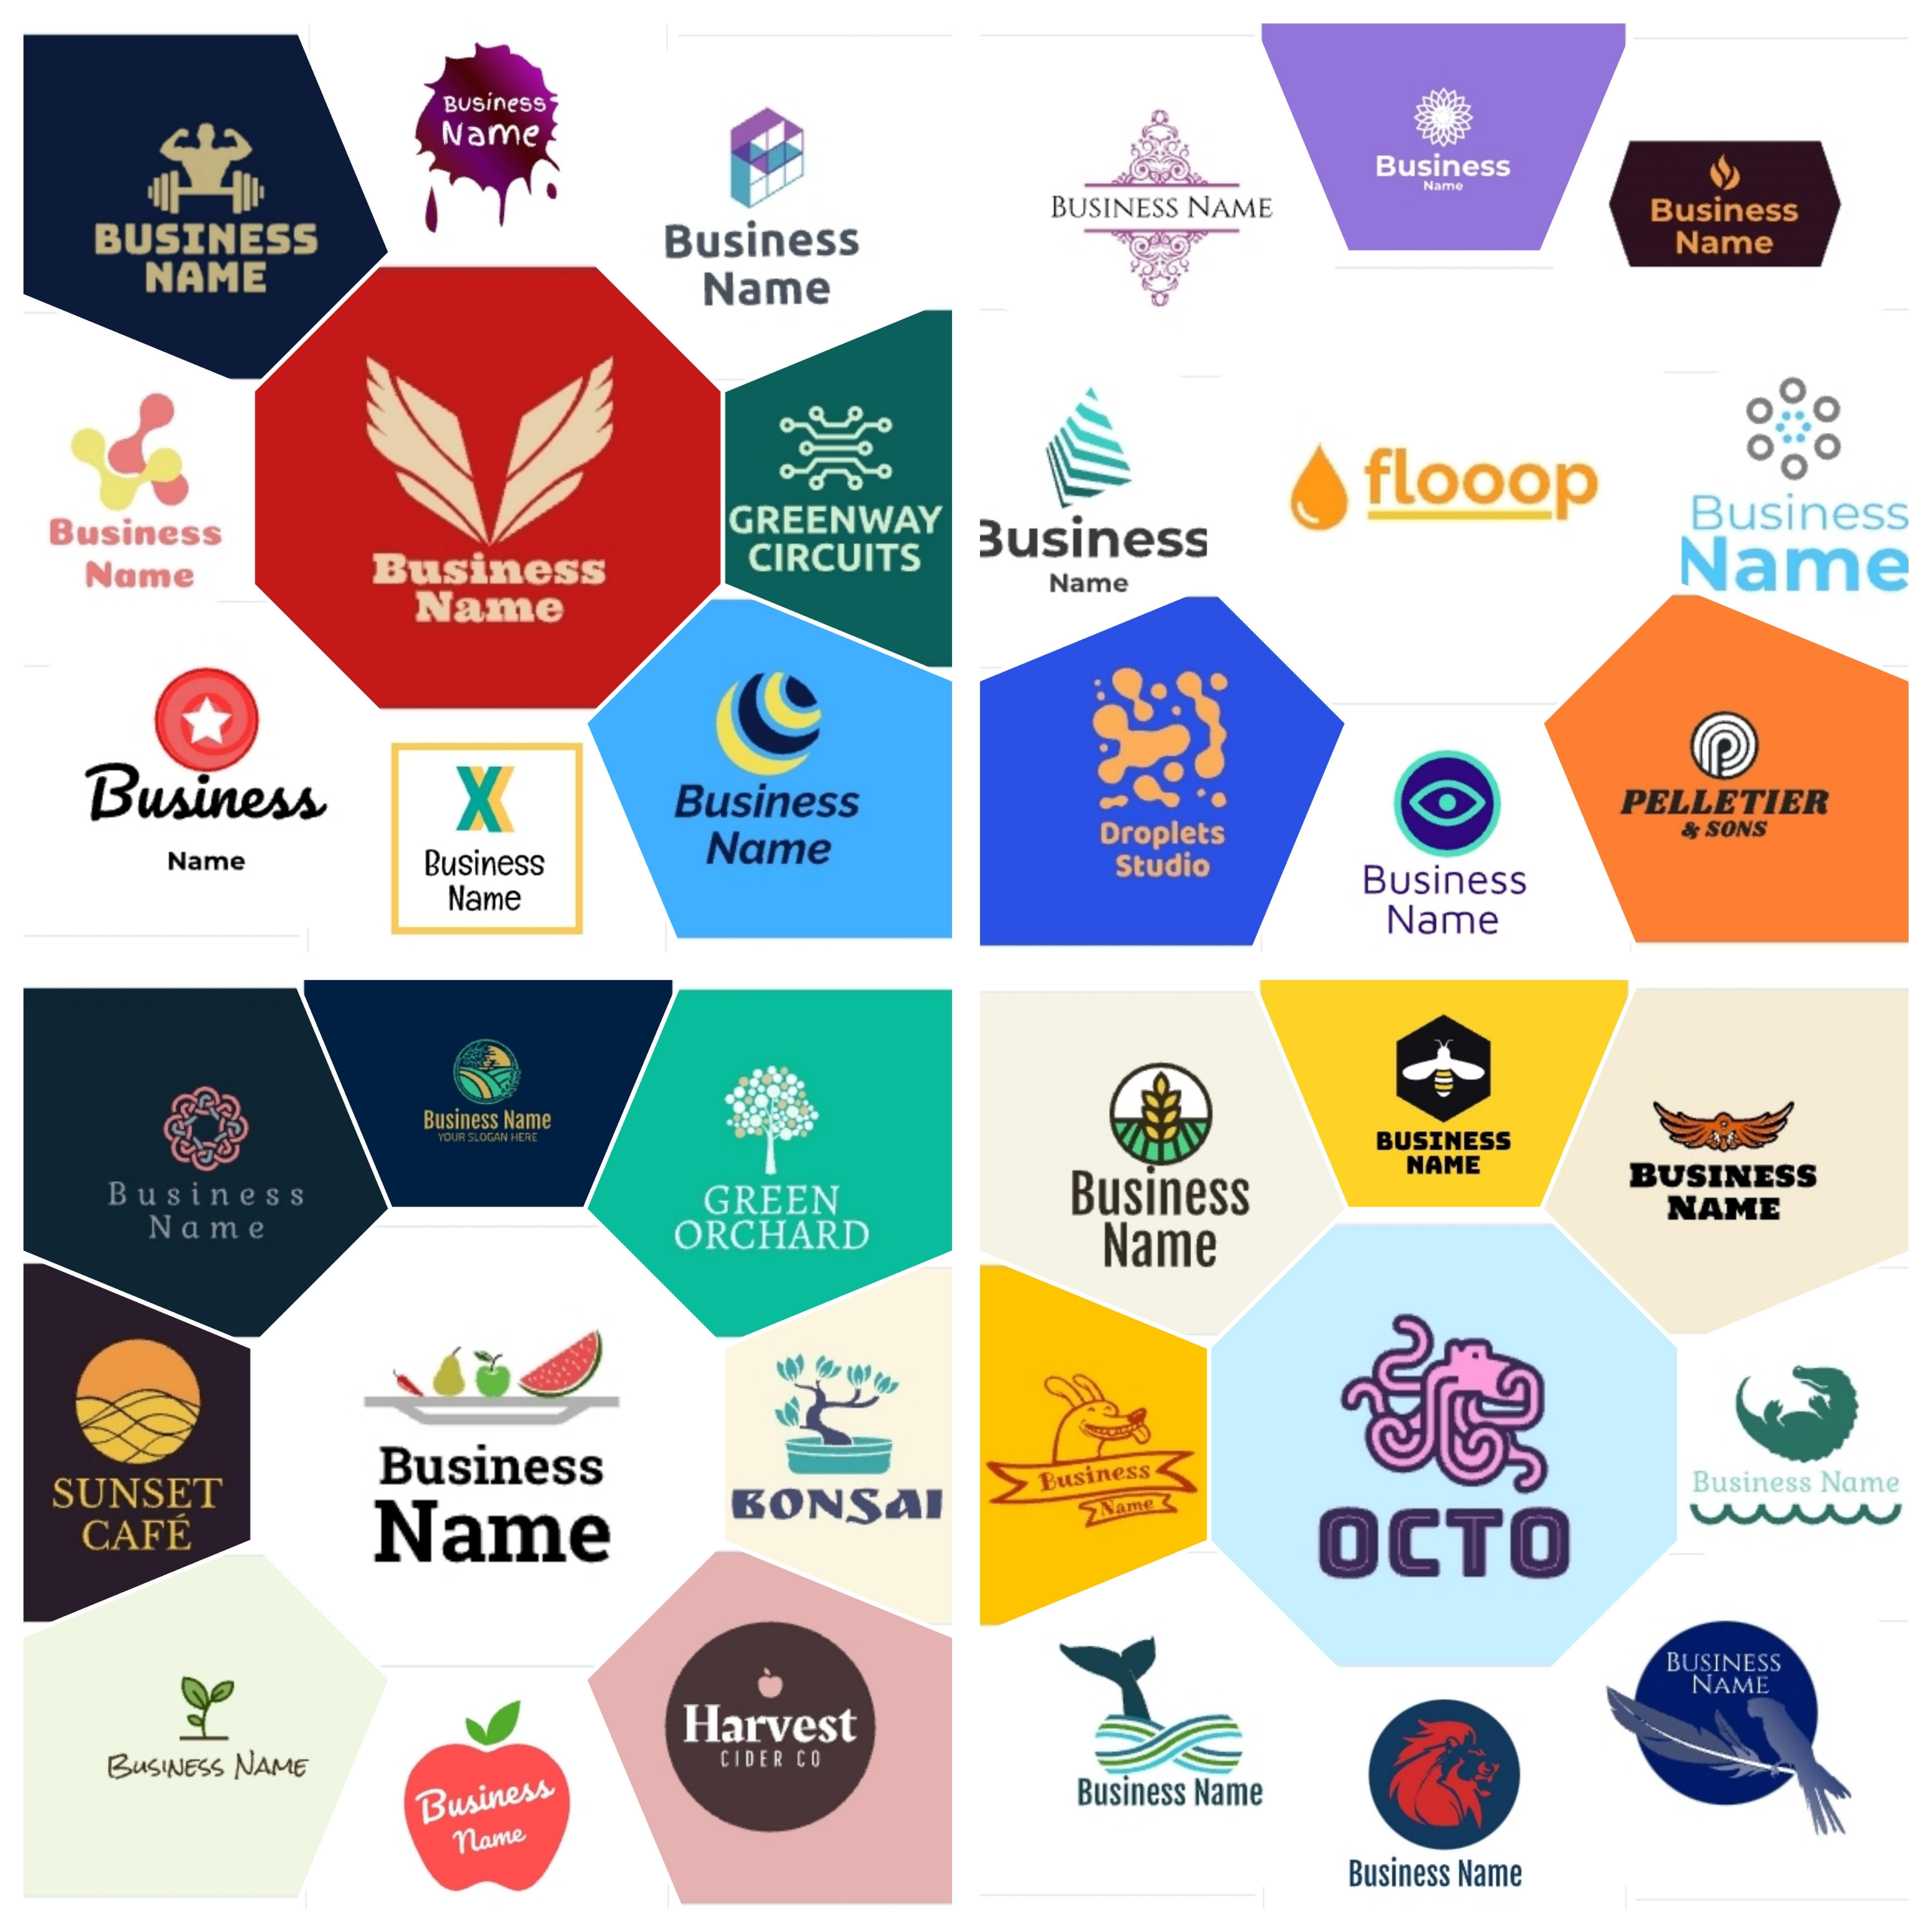 Cheap logo design professionally for your business, 10 logos in less than 10 hours